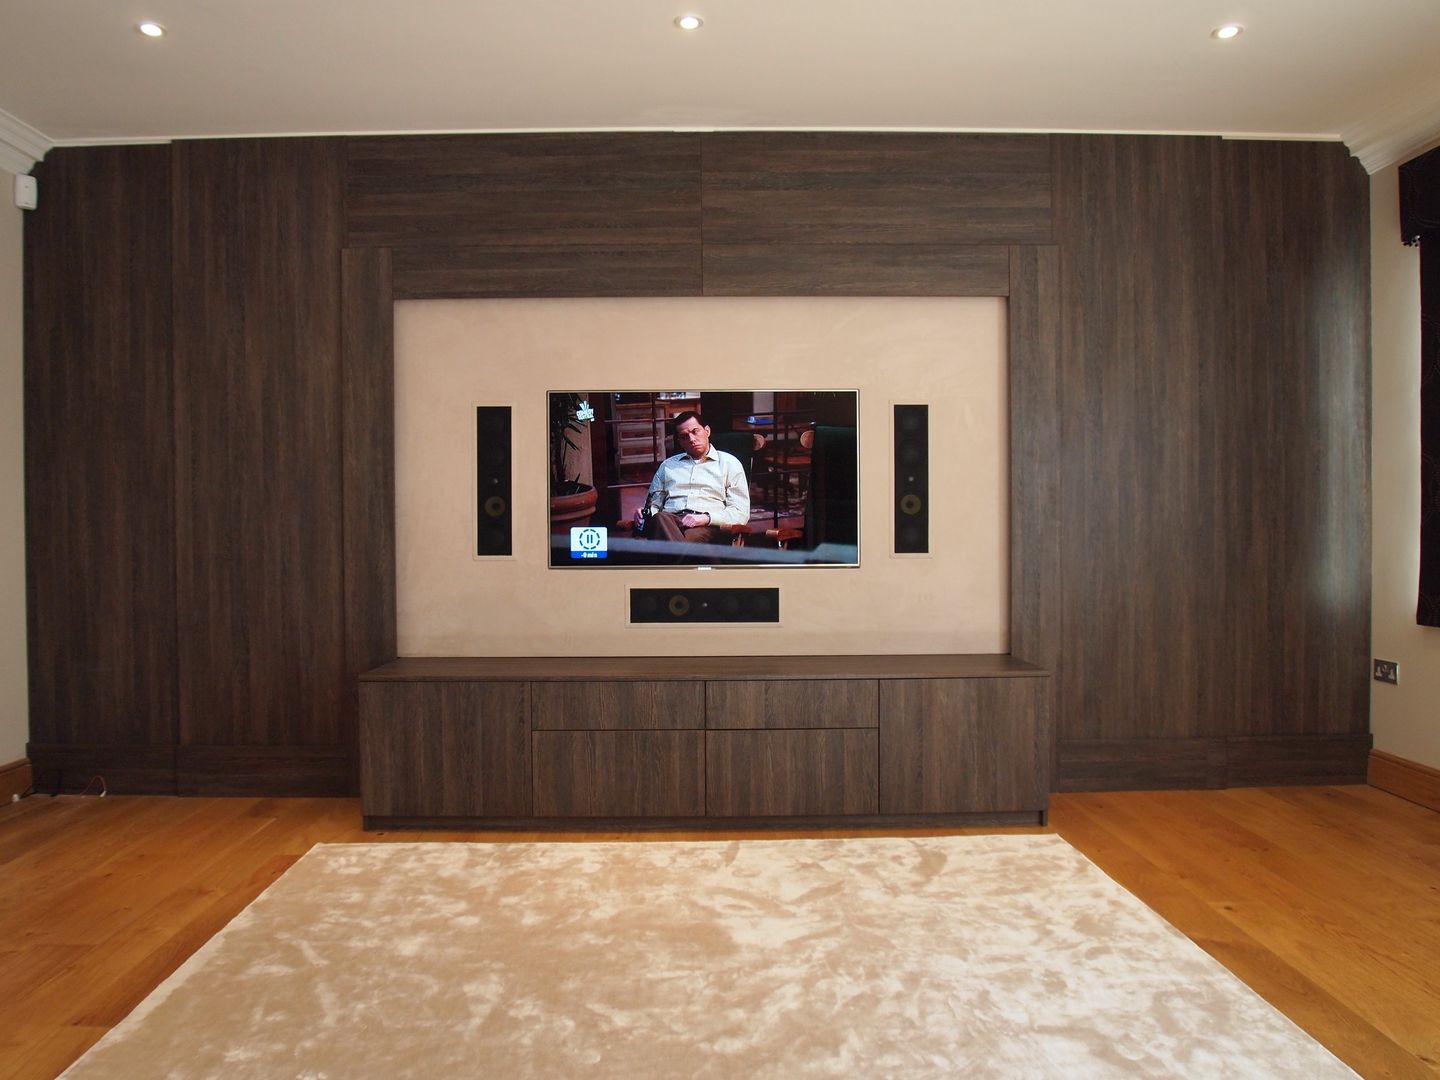 Dual purpose audio visual media unit with concealed 9 feet cinema screen and wood panelled walls. Designer Vision and Sound: Bespoke Cabinet Making غرفة الميديا أثاث